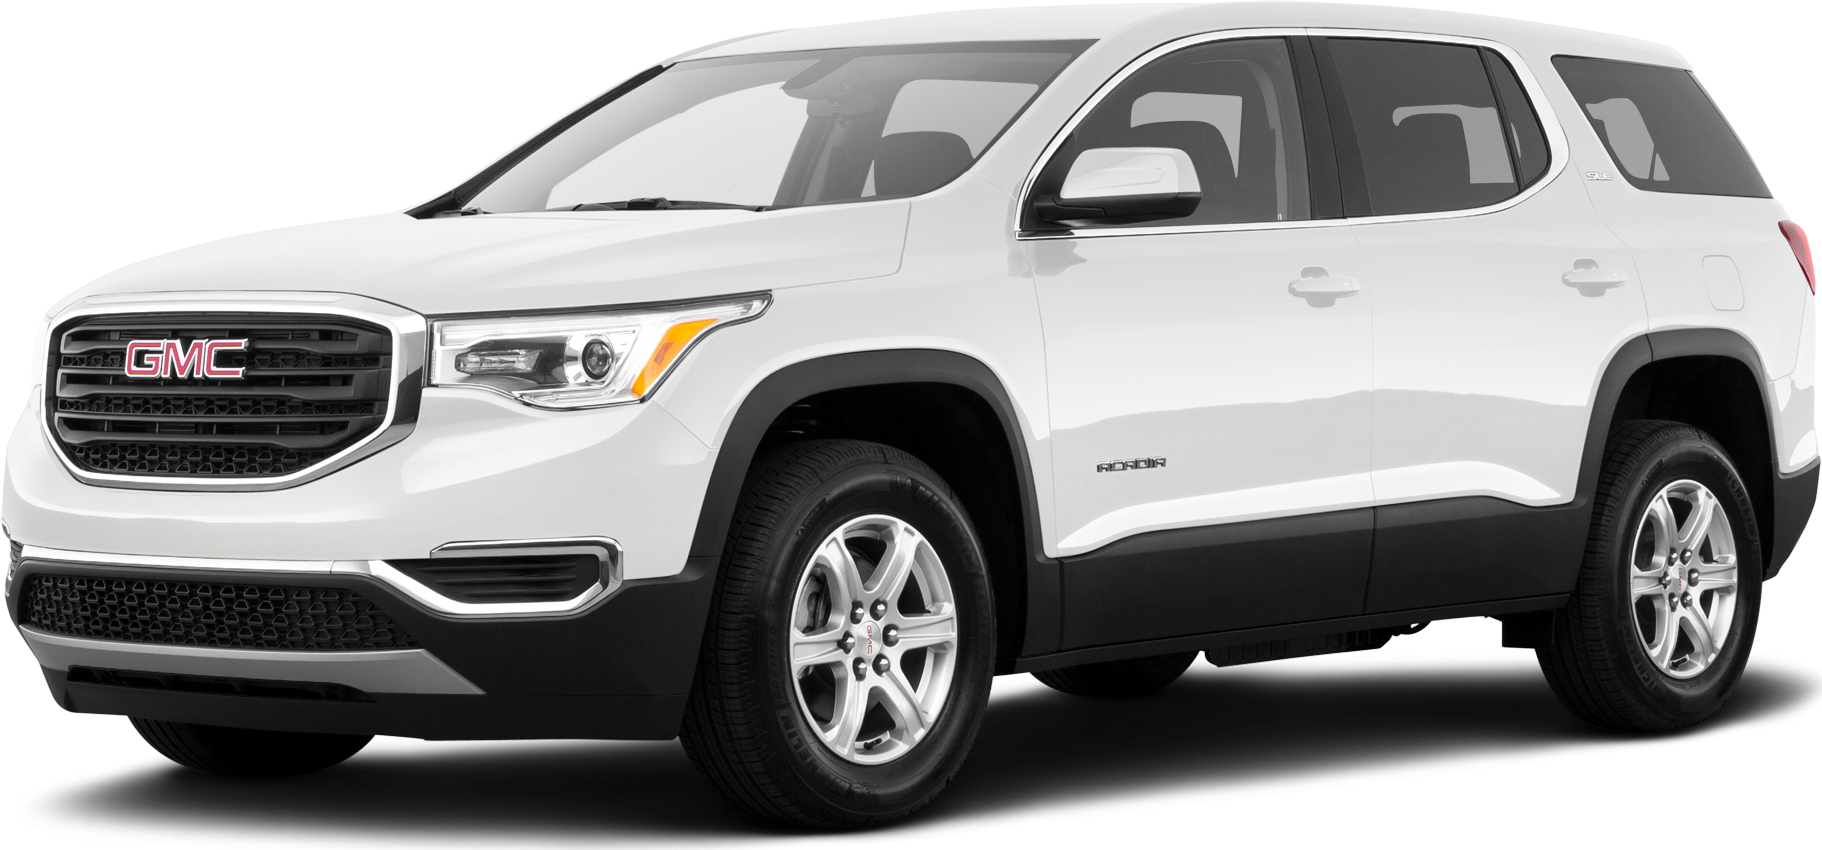 2019 Gmc Acadia Price Value Ratings And Reviews Kelley Blue Book